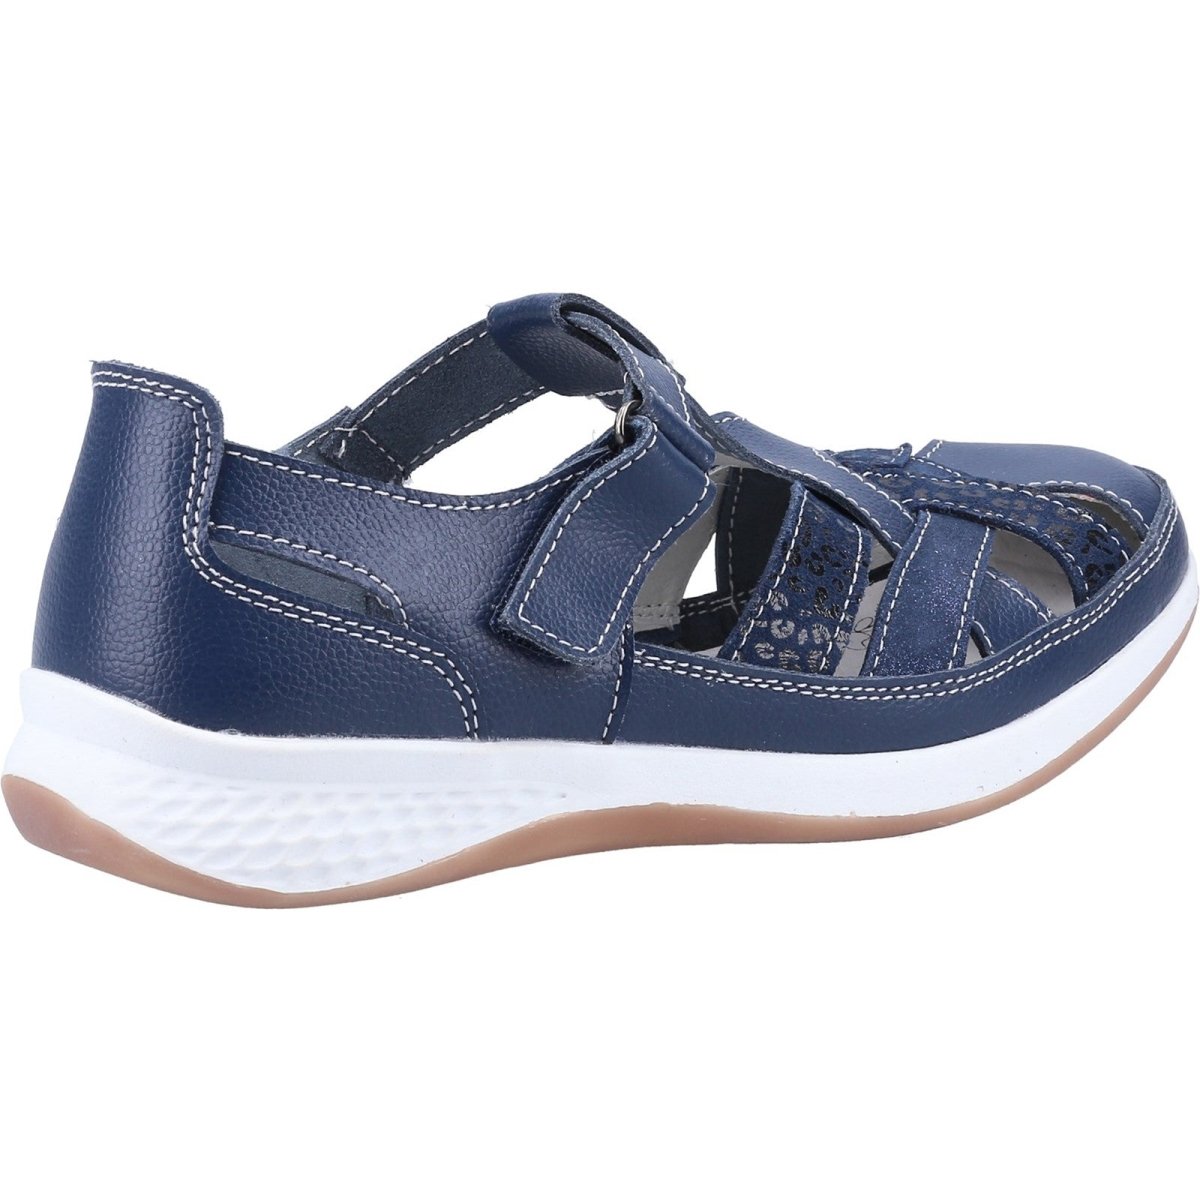 Fleet & Foster Hayley Ladies Summer Touch-Fastening Shoes - Shoe Store Direct